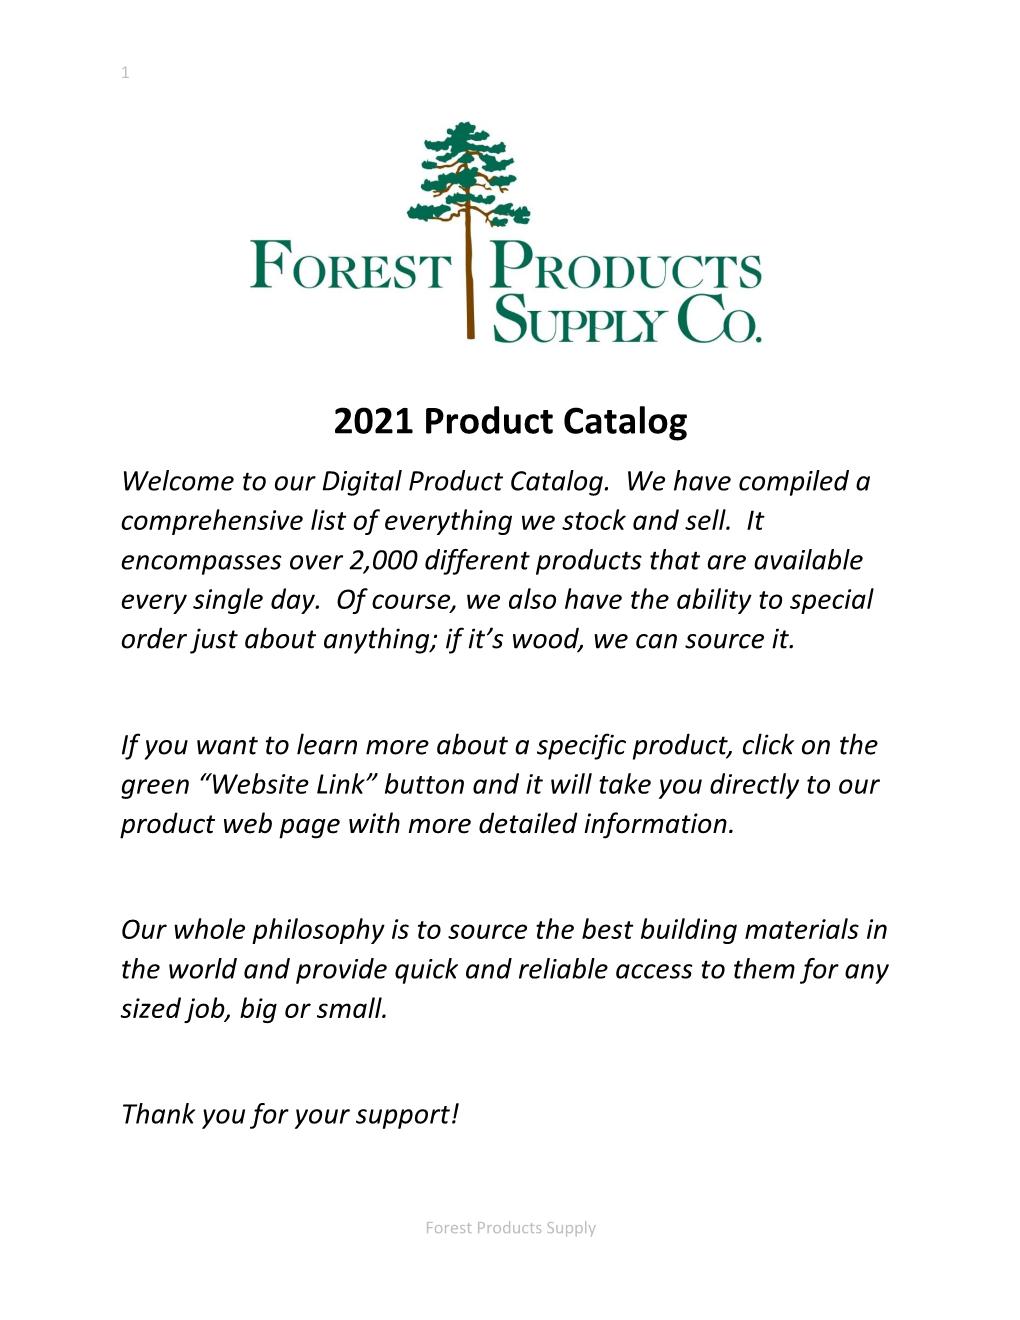 2021 Product Catalog Welcome to Our Digital Product Catalog